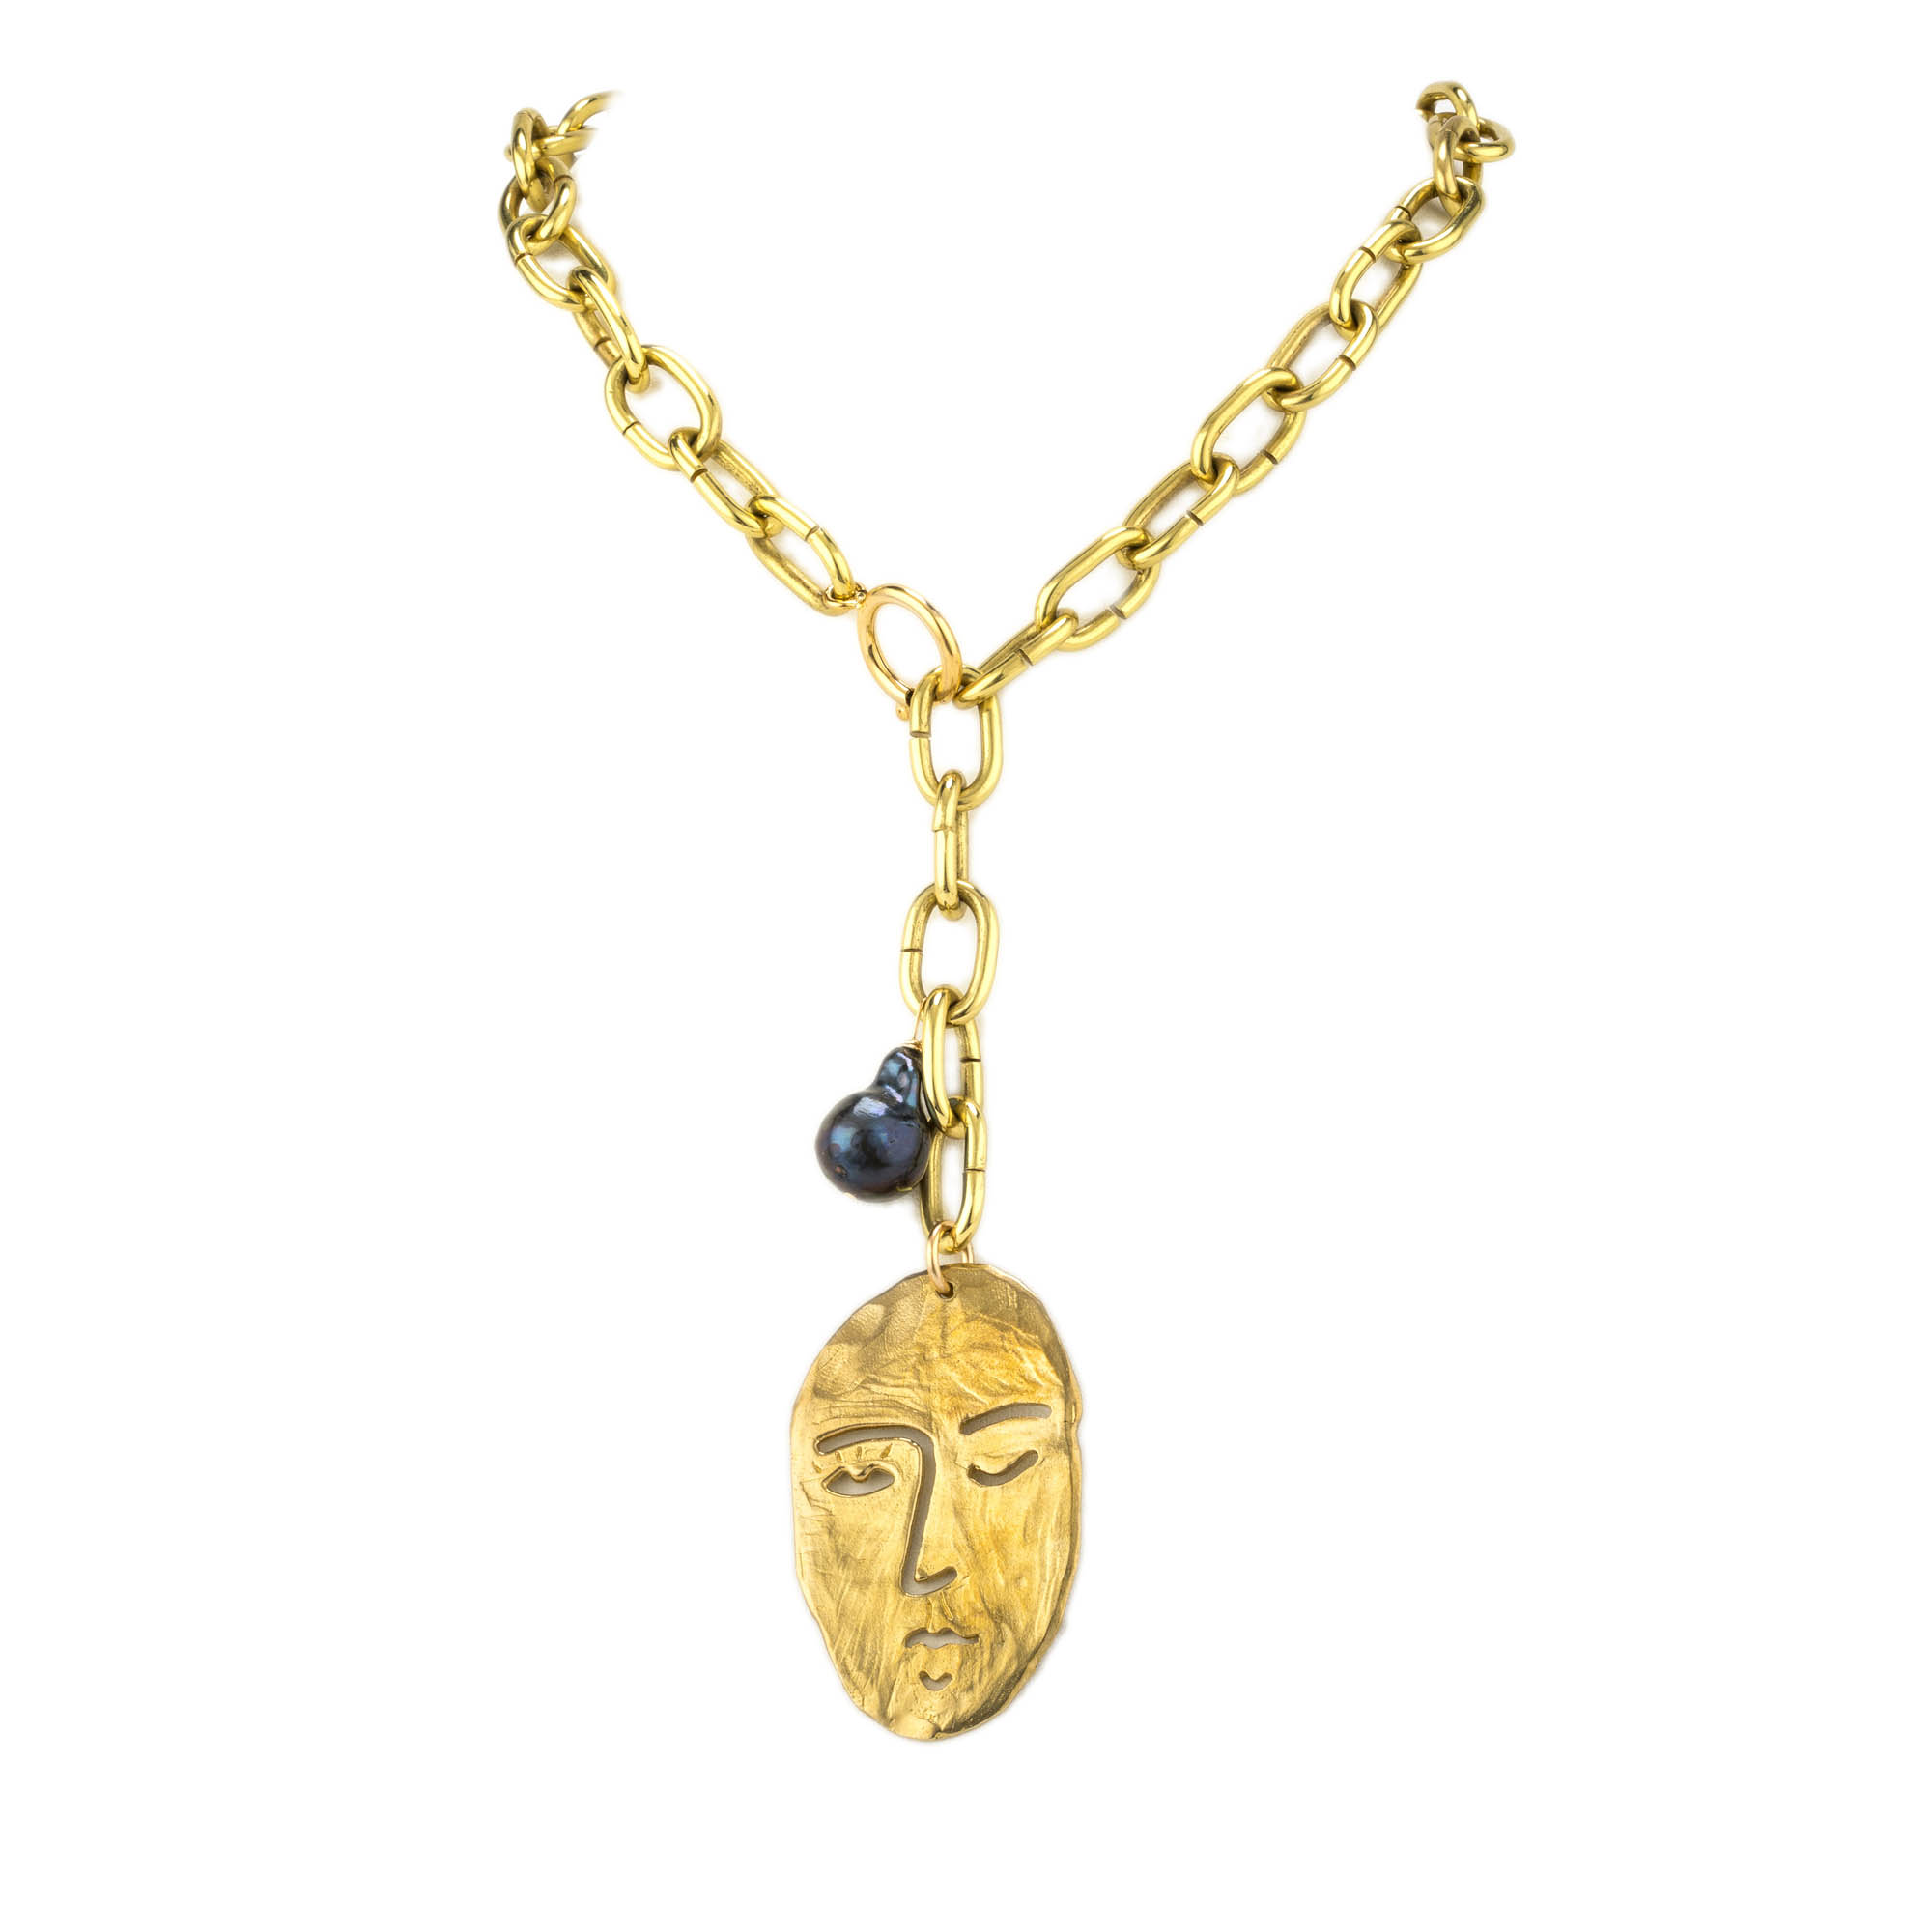 Featured image for “Cara Brass Necklace”